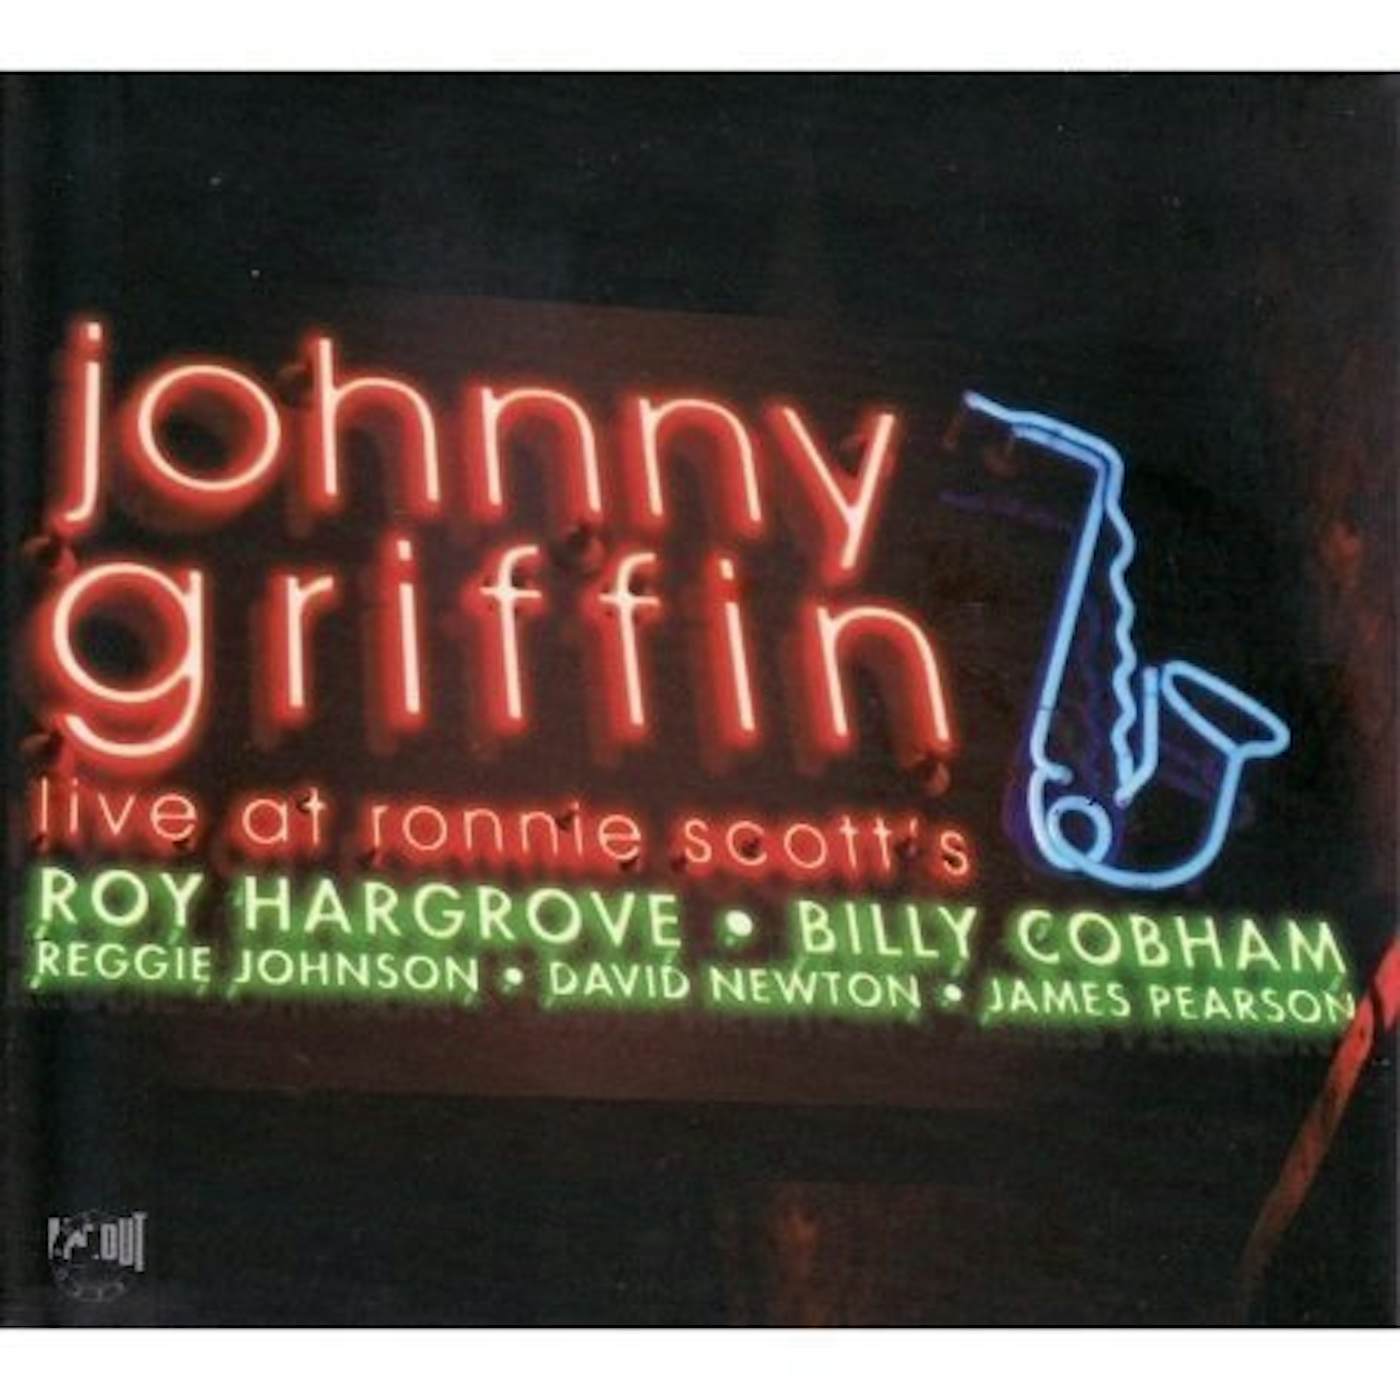 Johnny Griffin LIVE AT RONNIES SCOTT'S CD